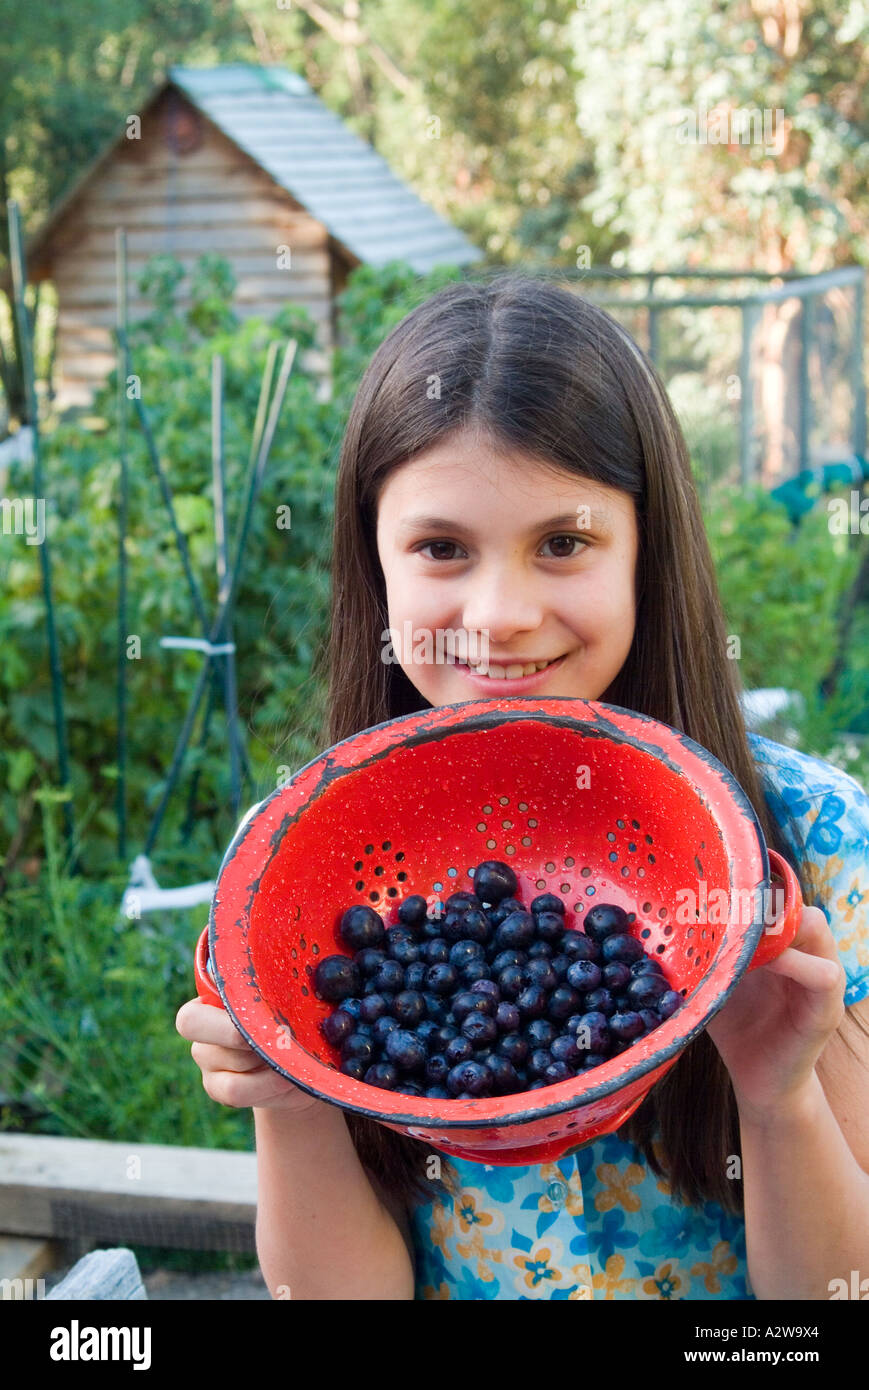 Young girl with red enamel colander of organically grown blueberries Stock Photo